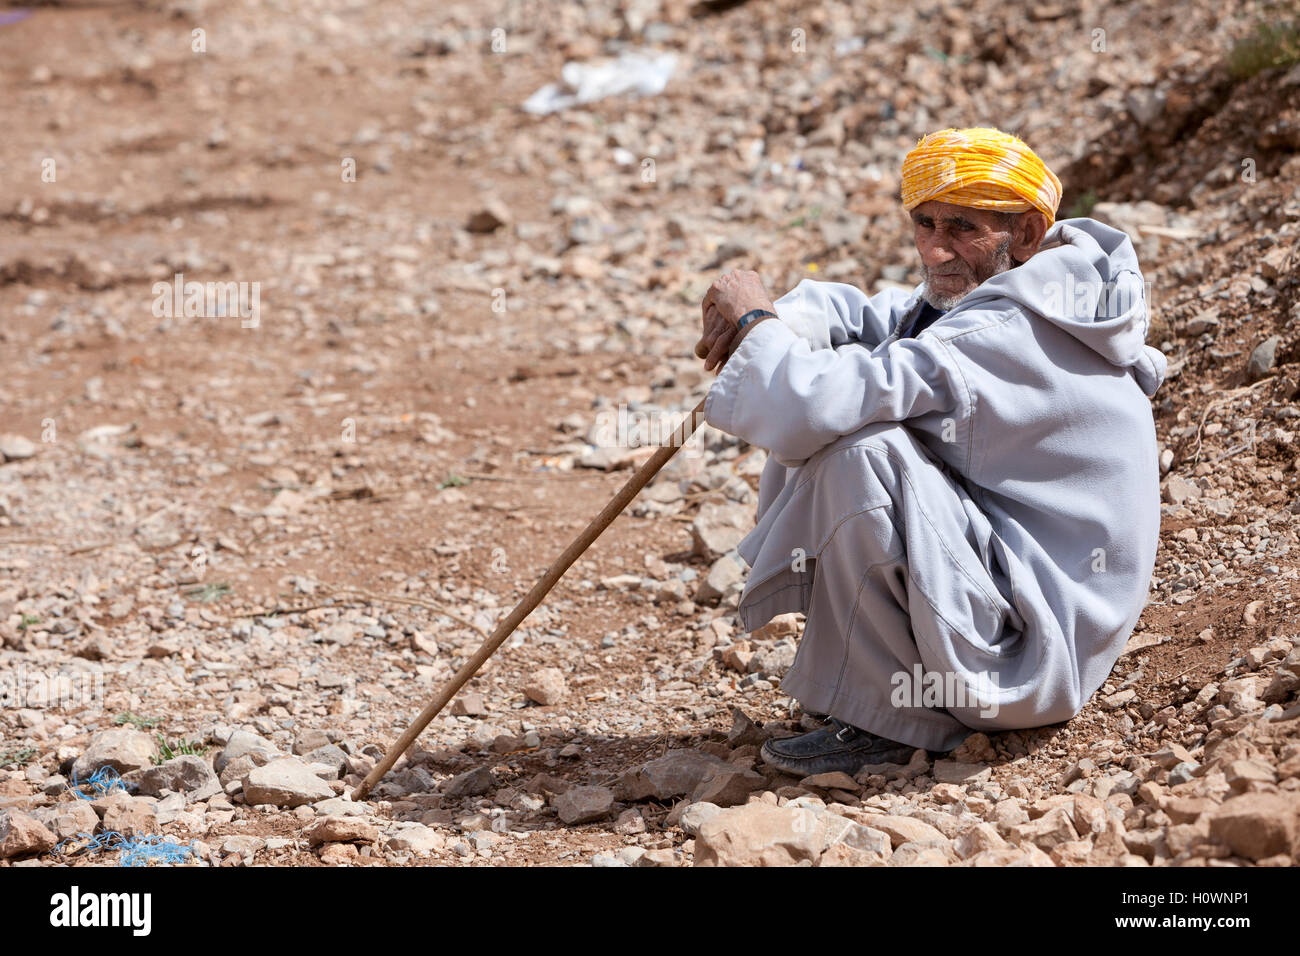 Atlas Mountains, Morocco.  Market Scene in Village near Dades Gorge.  Man Resting with his Walking Stick. Stock Photo